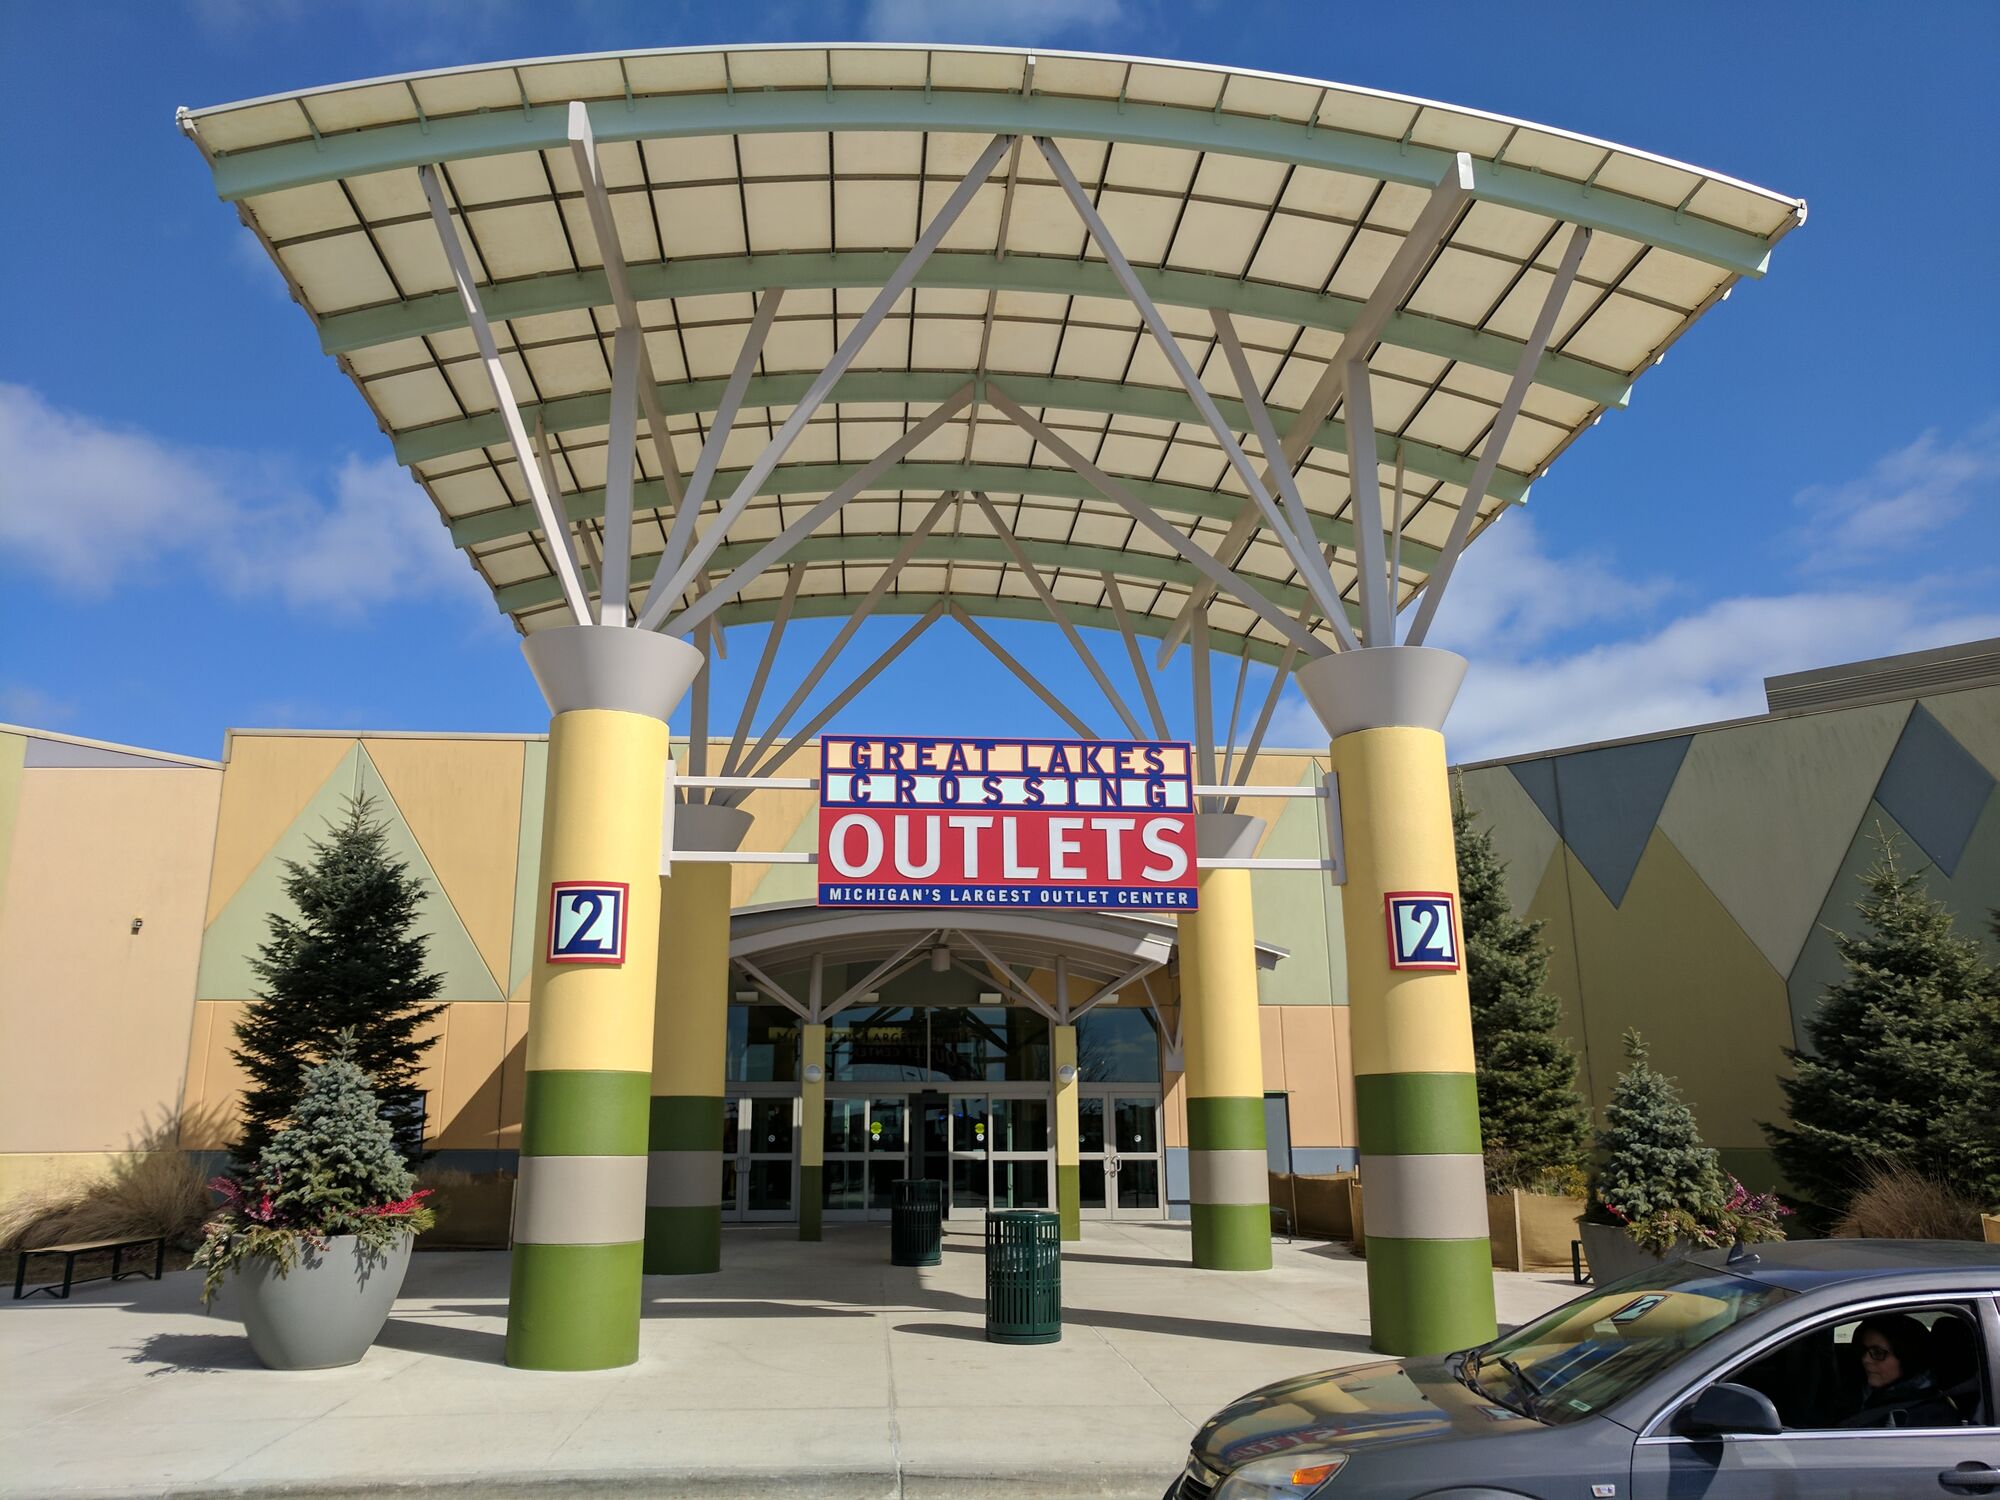 Great Lakes Crossing Outlets | Malls 